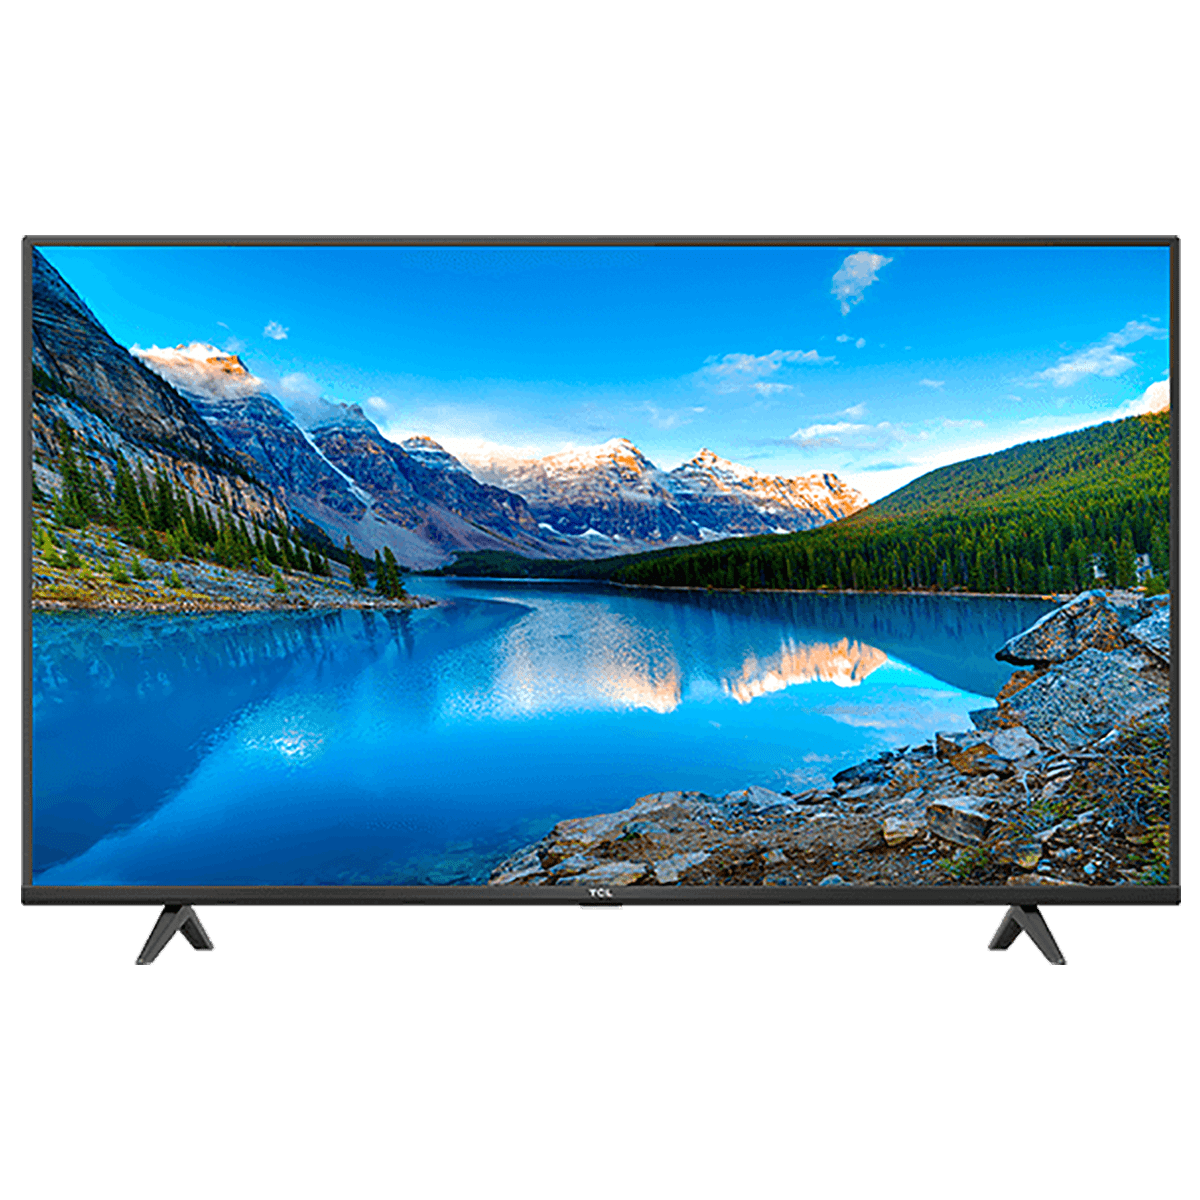 TCL - TCL P615 108cm (43 Inch) 4K Ultra HD LED Android Smart TV (Hands-Free Voice Control, 43P615, Black)